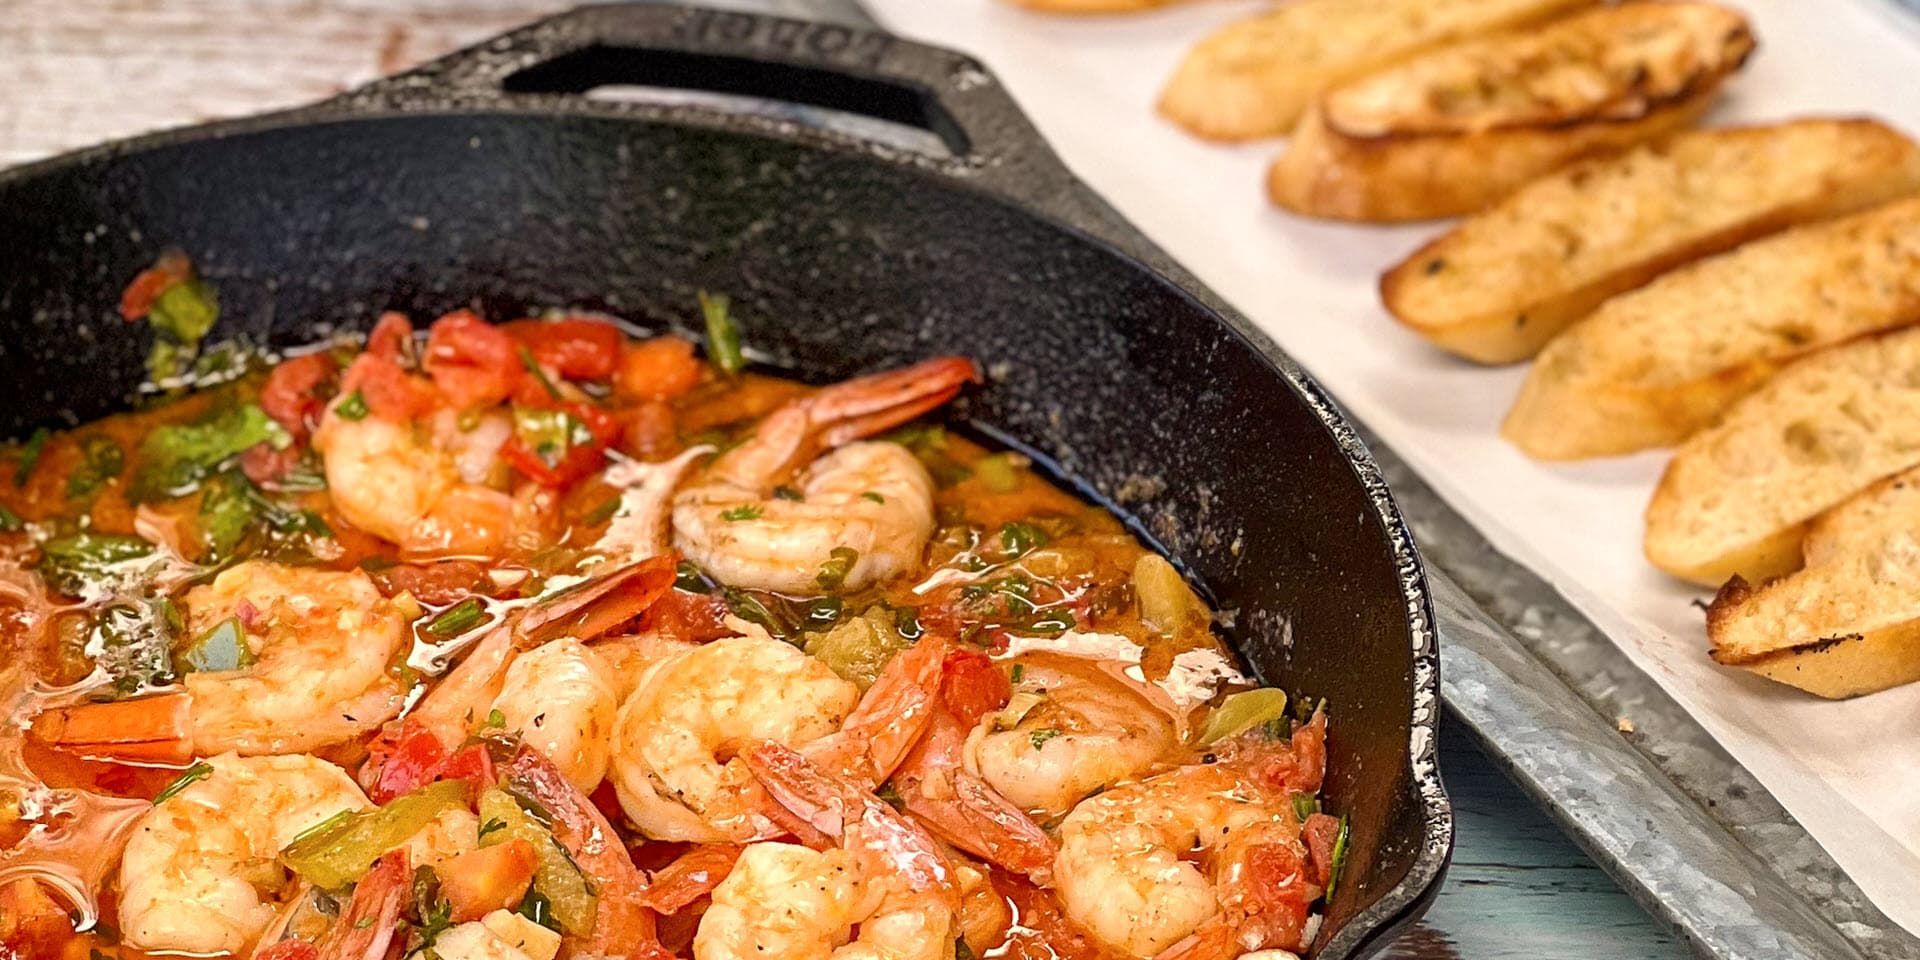 a skillet filled with shrimp and vegetables next to a plate of bread wedges .